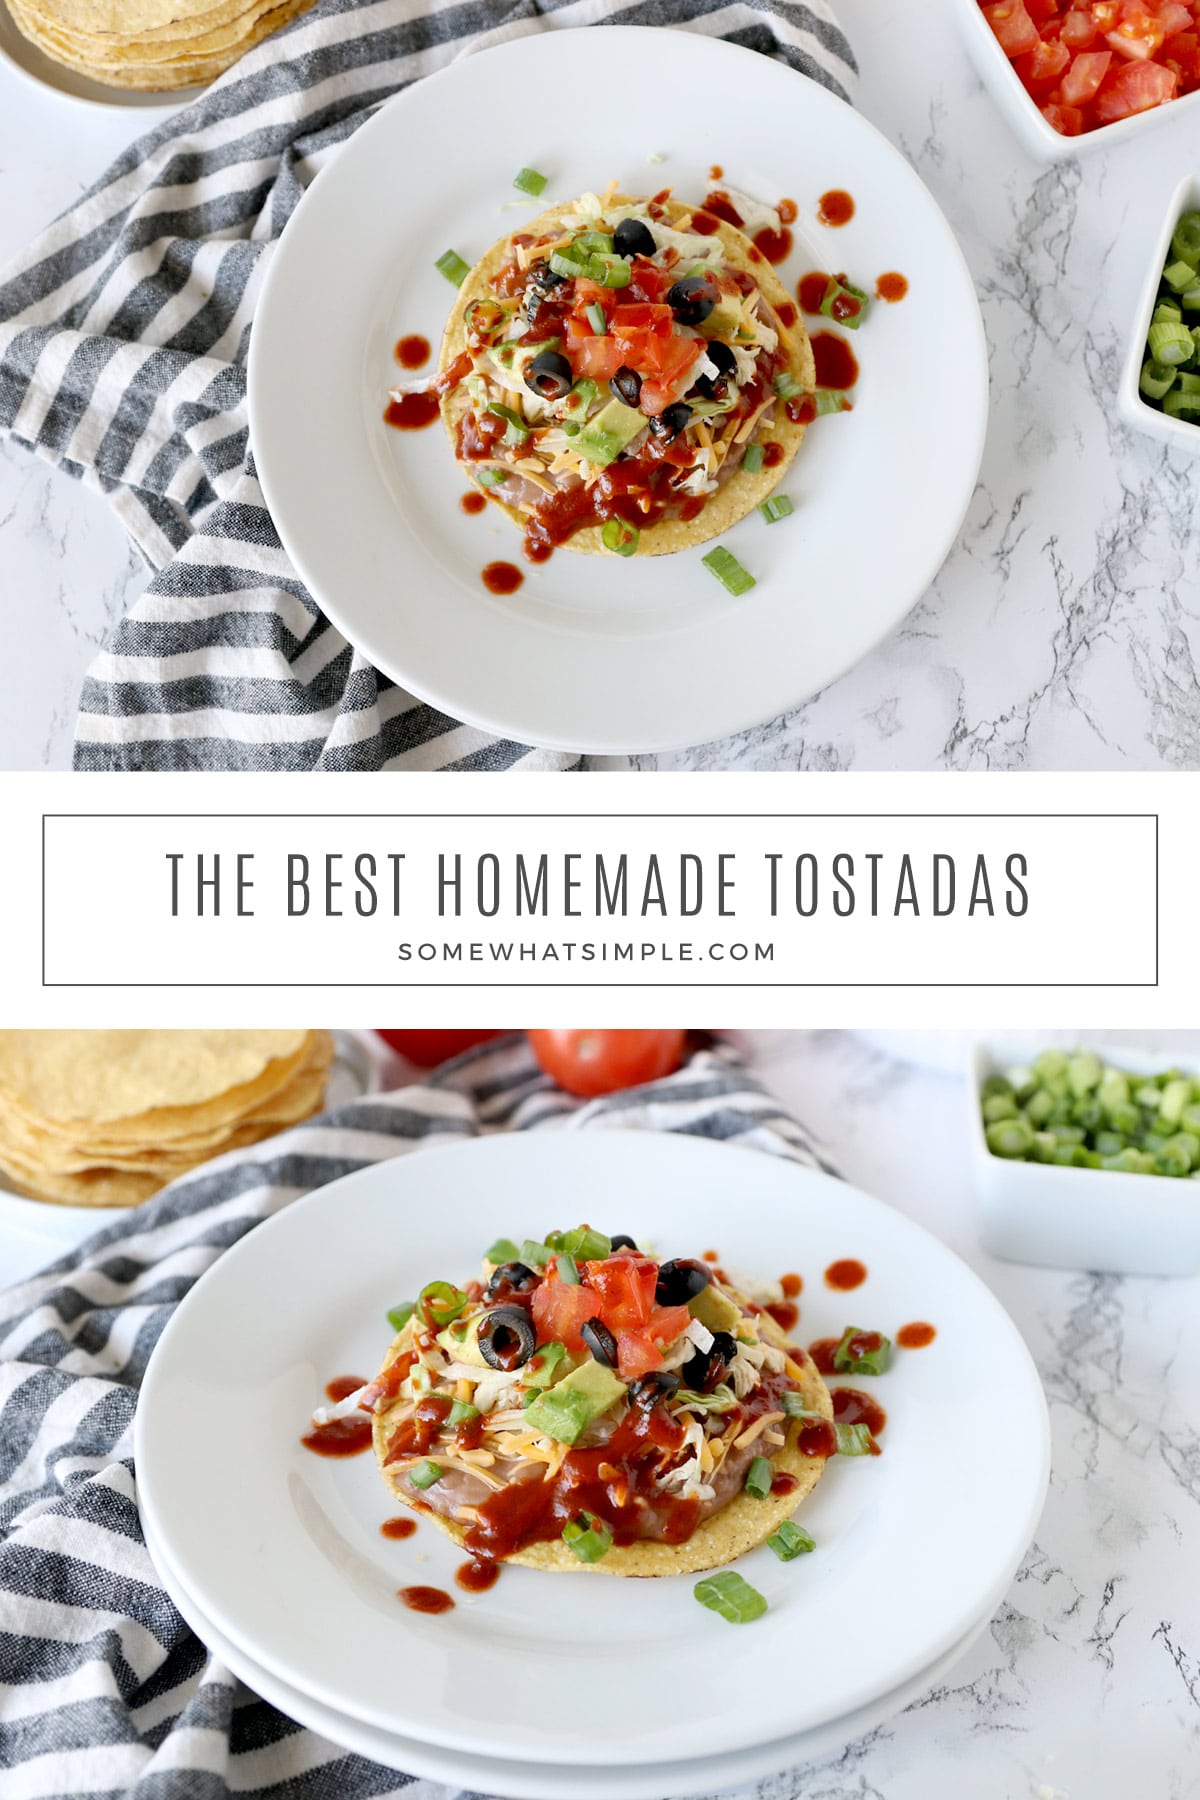 Homemade tostadas are easy to make and are a nice alternative to a standard taco. This simple recipe is so good, you'll never make them any other way again! via @somewhatsimple